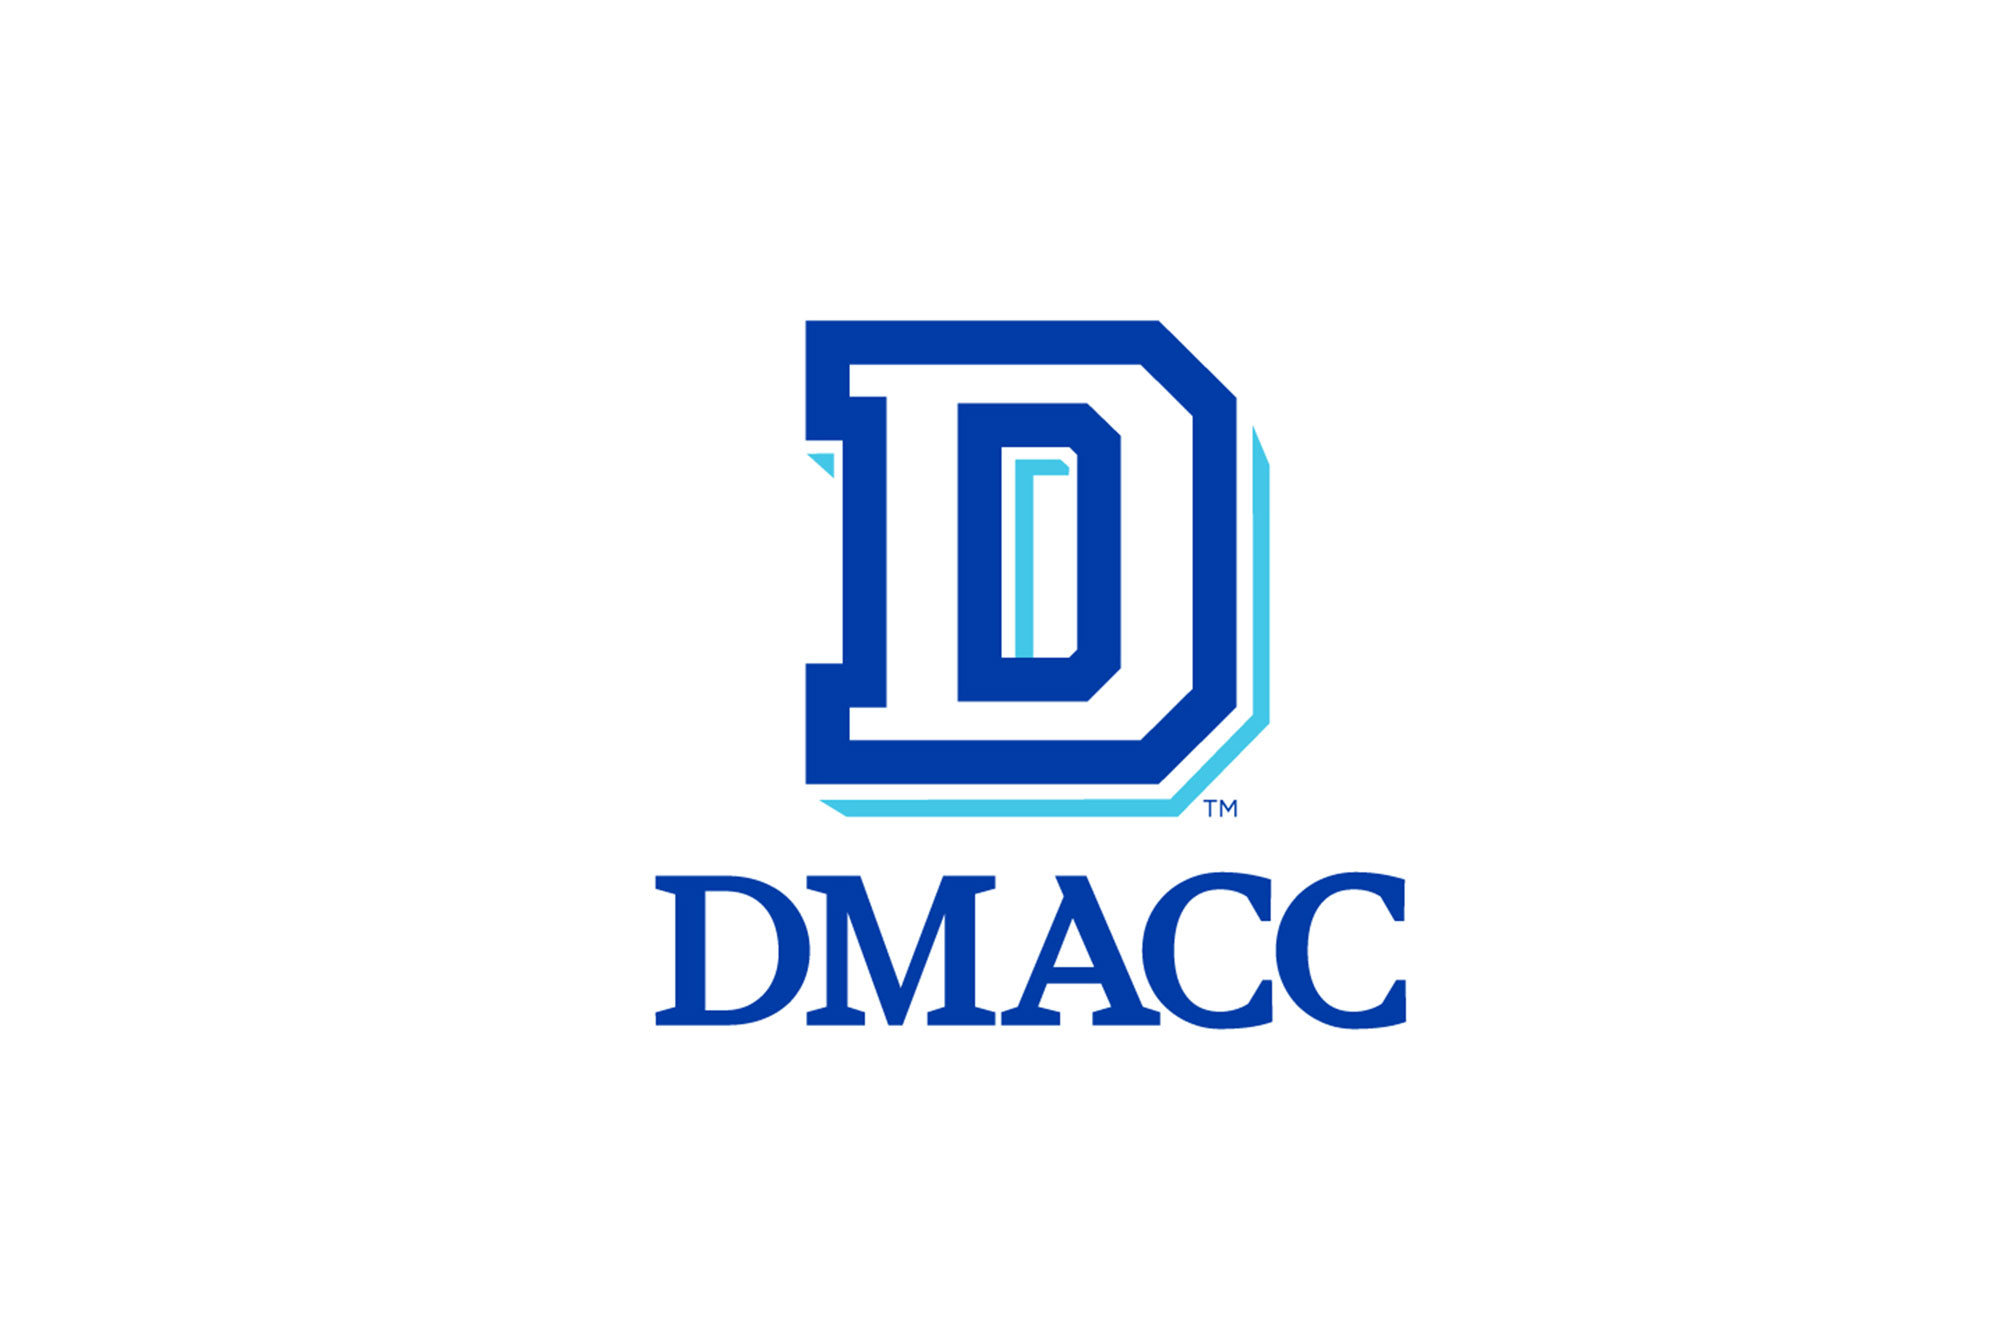 DMACC has also hired a new Executive Director of Human Resources.